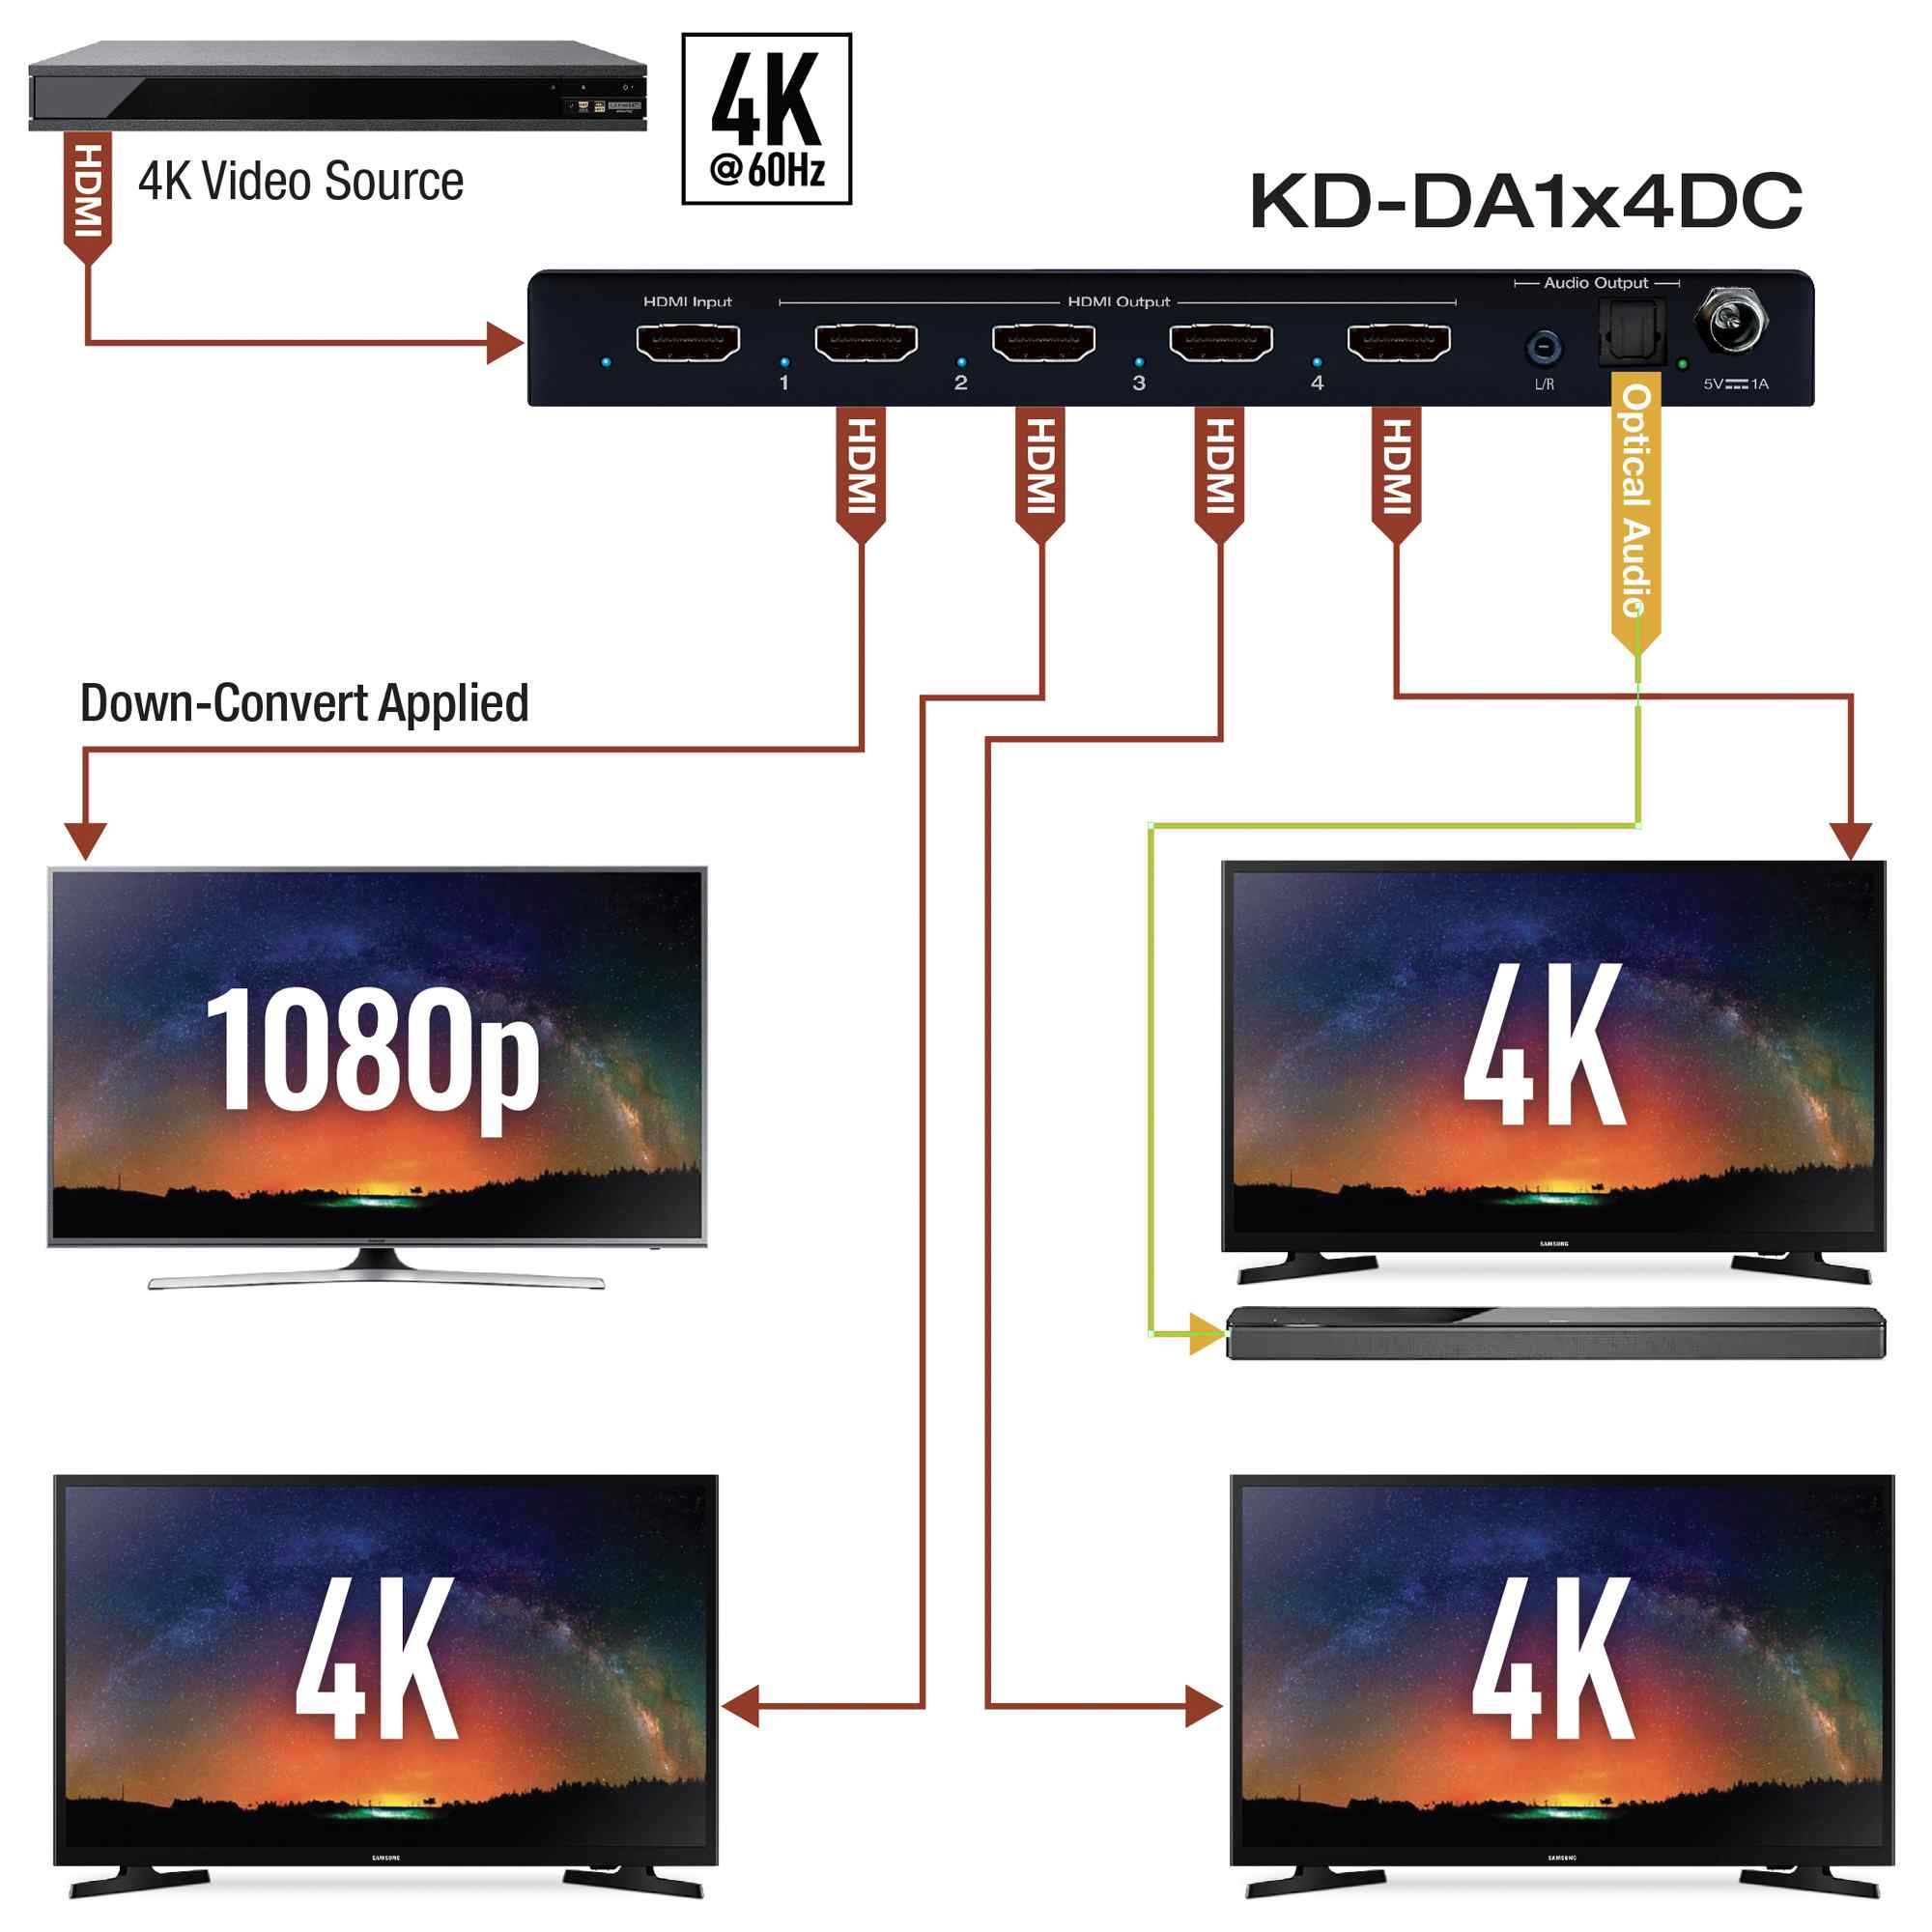 Thumbnail of Example Diagram showing multiple devices connected to the hdmi splitter with audio